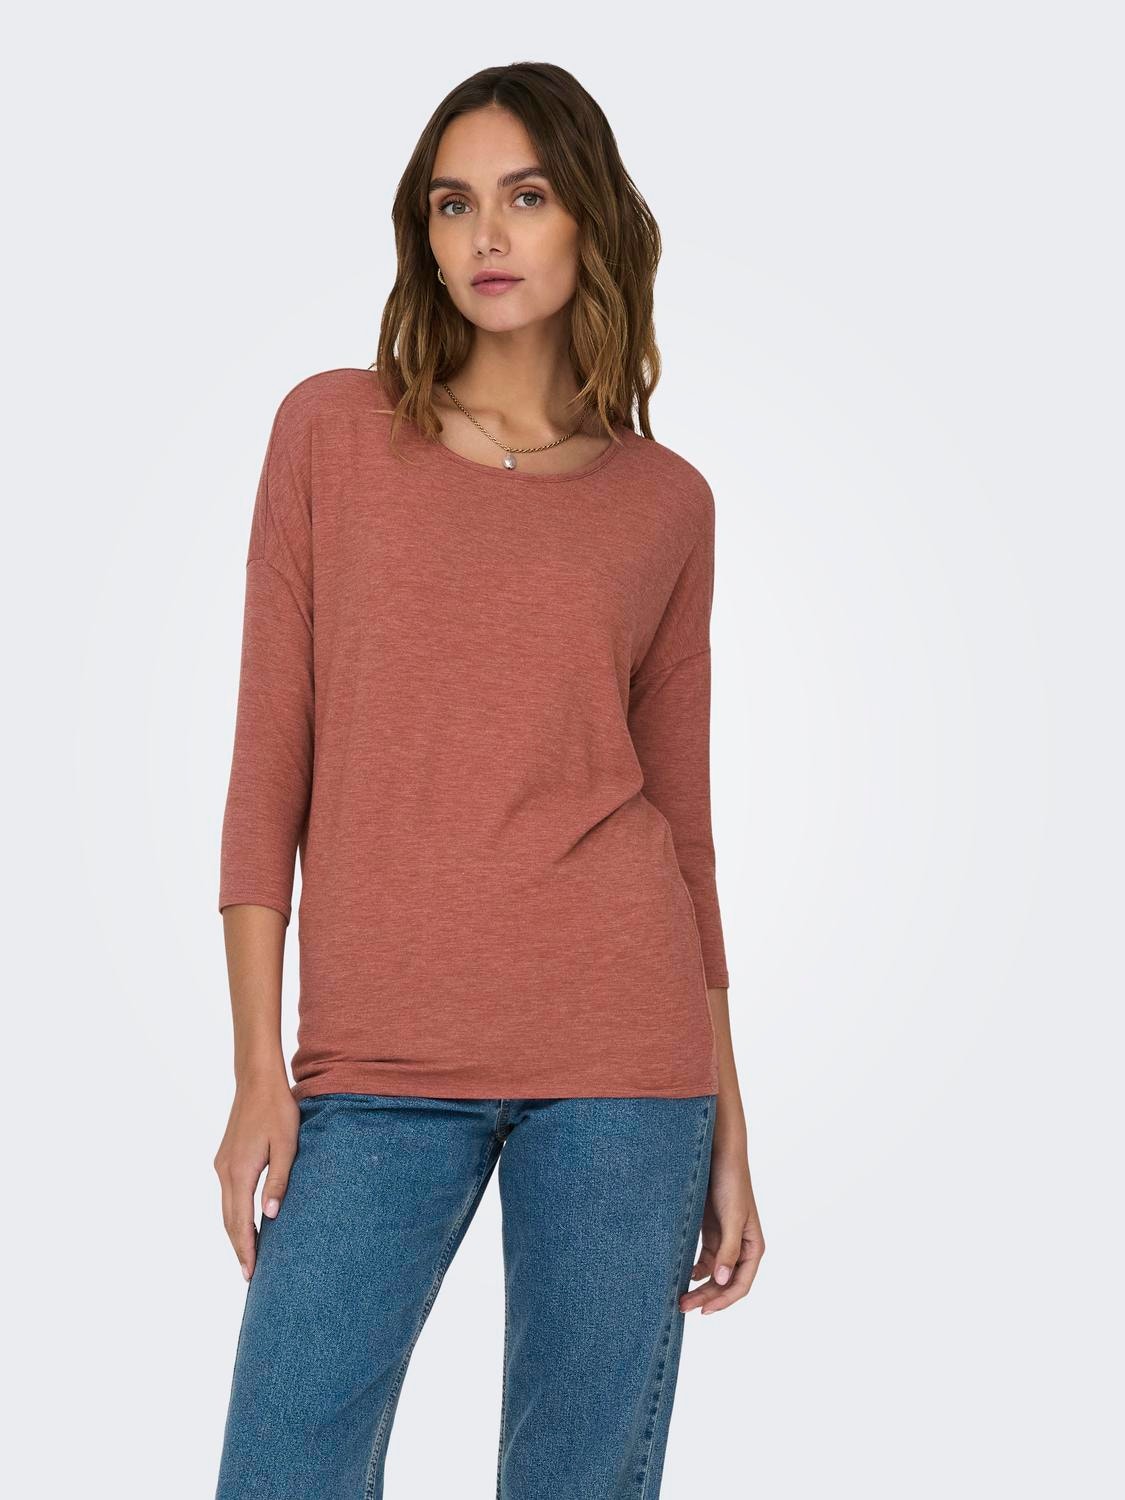 ONLY Loose Fit Round Neck Dropped shoulders Top -Marsala - 15157920